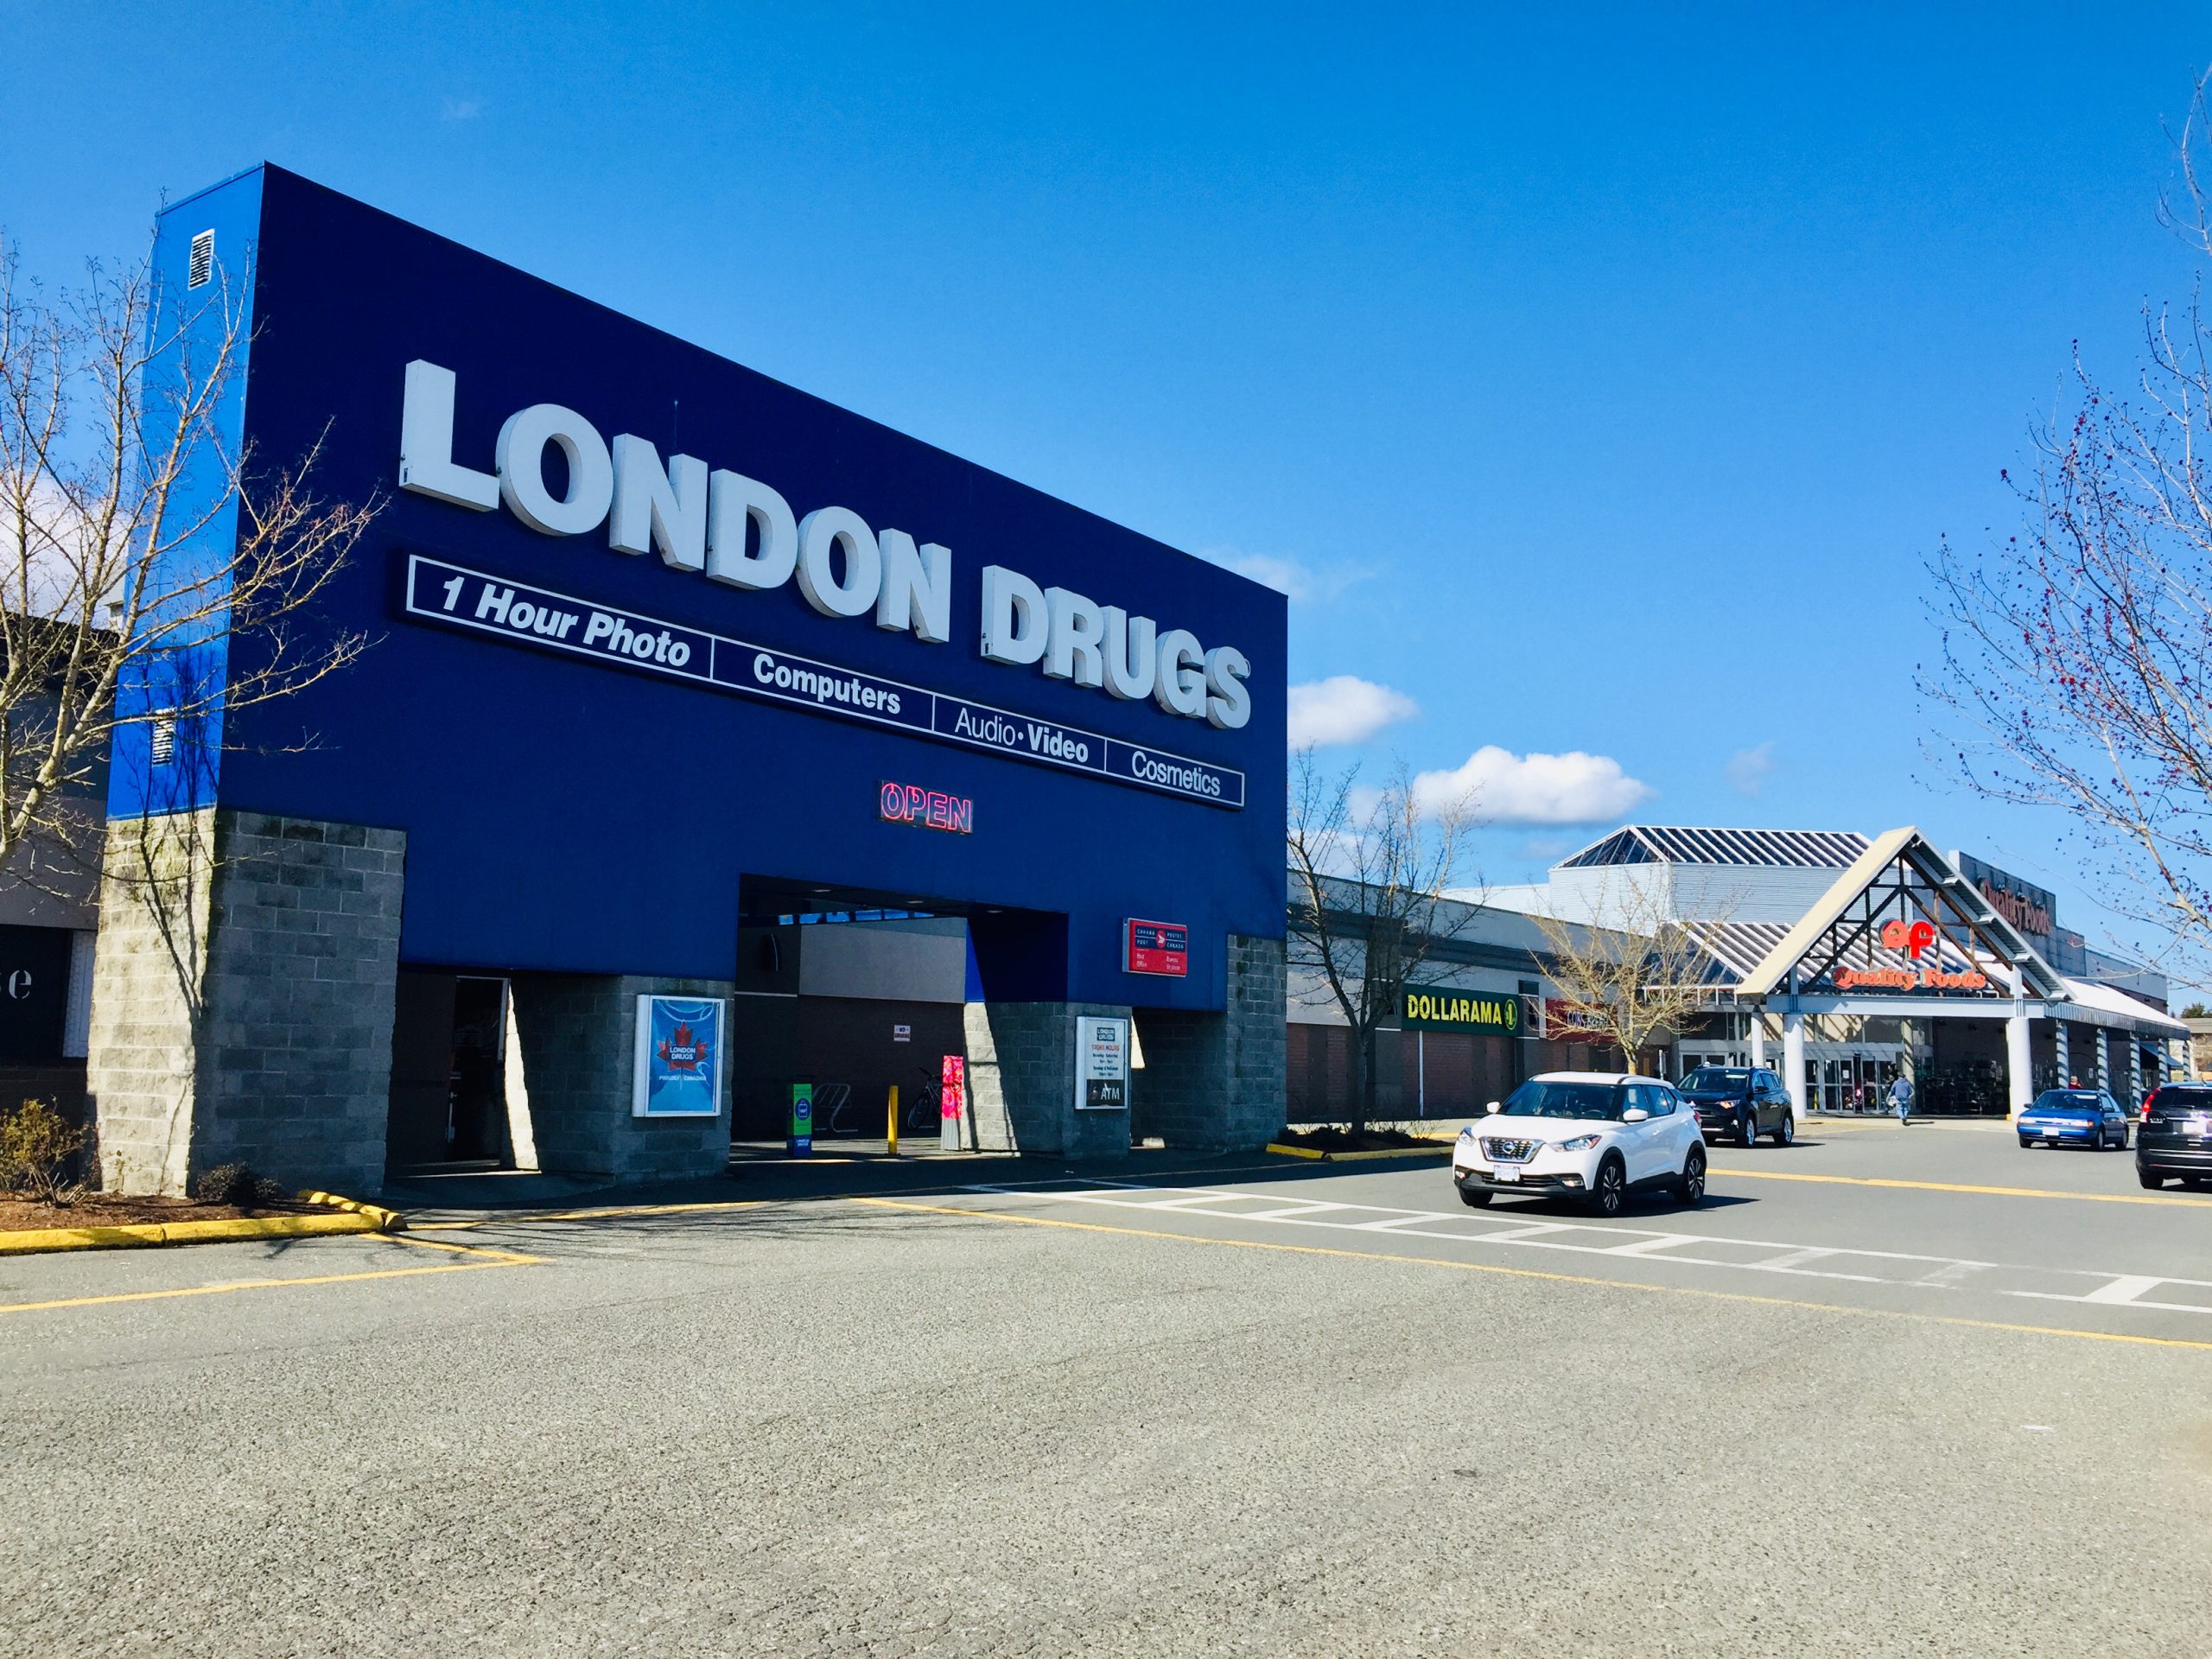 London Drugs steps up to support small businesses - My Powell River Now